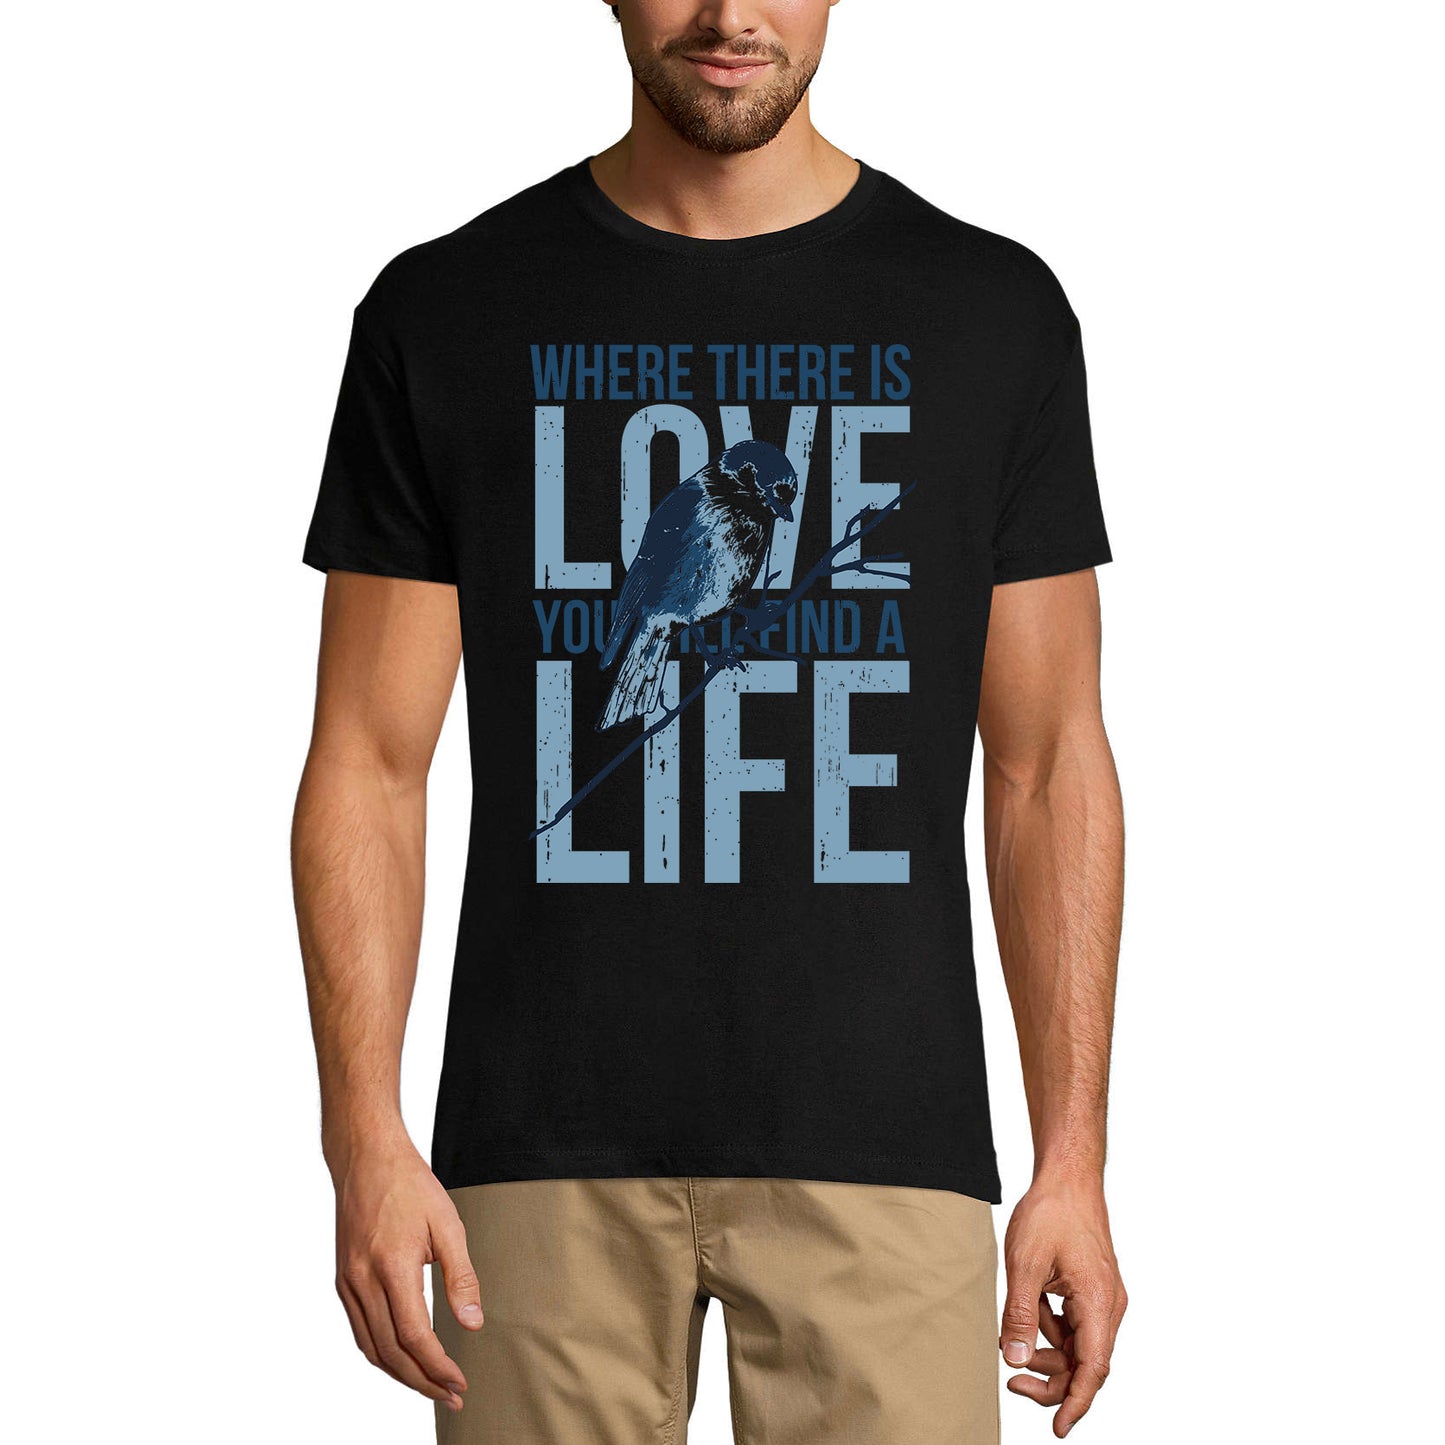 ULTRABASIC Men's T-Shirt Where There is Love You Will Find Life - Bird Quote Shirt